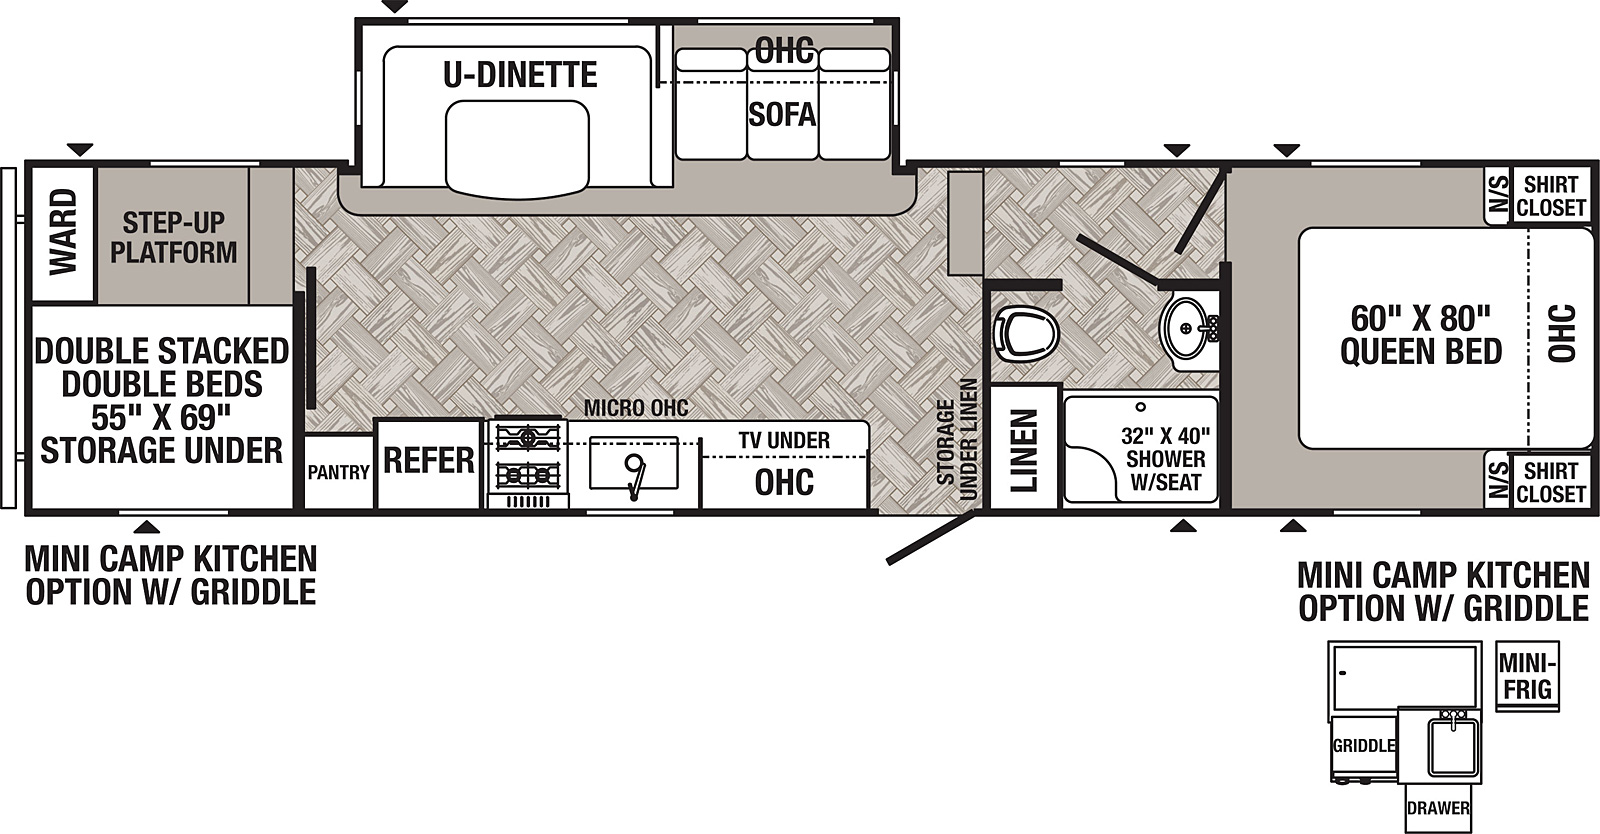 The 299BHS has one slide out on the off door side. Interior layout from front to back: front bedroom with queen bed, overhead cabinet, shirt closet and night stand on each side; side aisle bathroom on door side; step down to main living area; off door side slide out with sofa, overhead cabinets and u-dinette; door side entry overhead cabinets, TV, microwave, sink, stove refrigerator and pantry; rear bunk room with step up platform, wardrobe and double stacked double beds with storage under. Optional exterior mini camp kitchen w/griddle available.